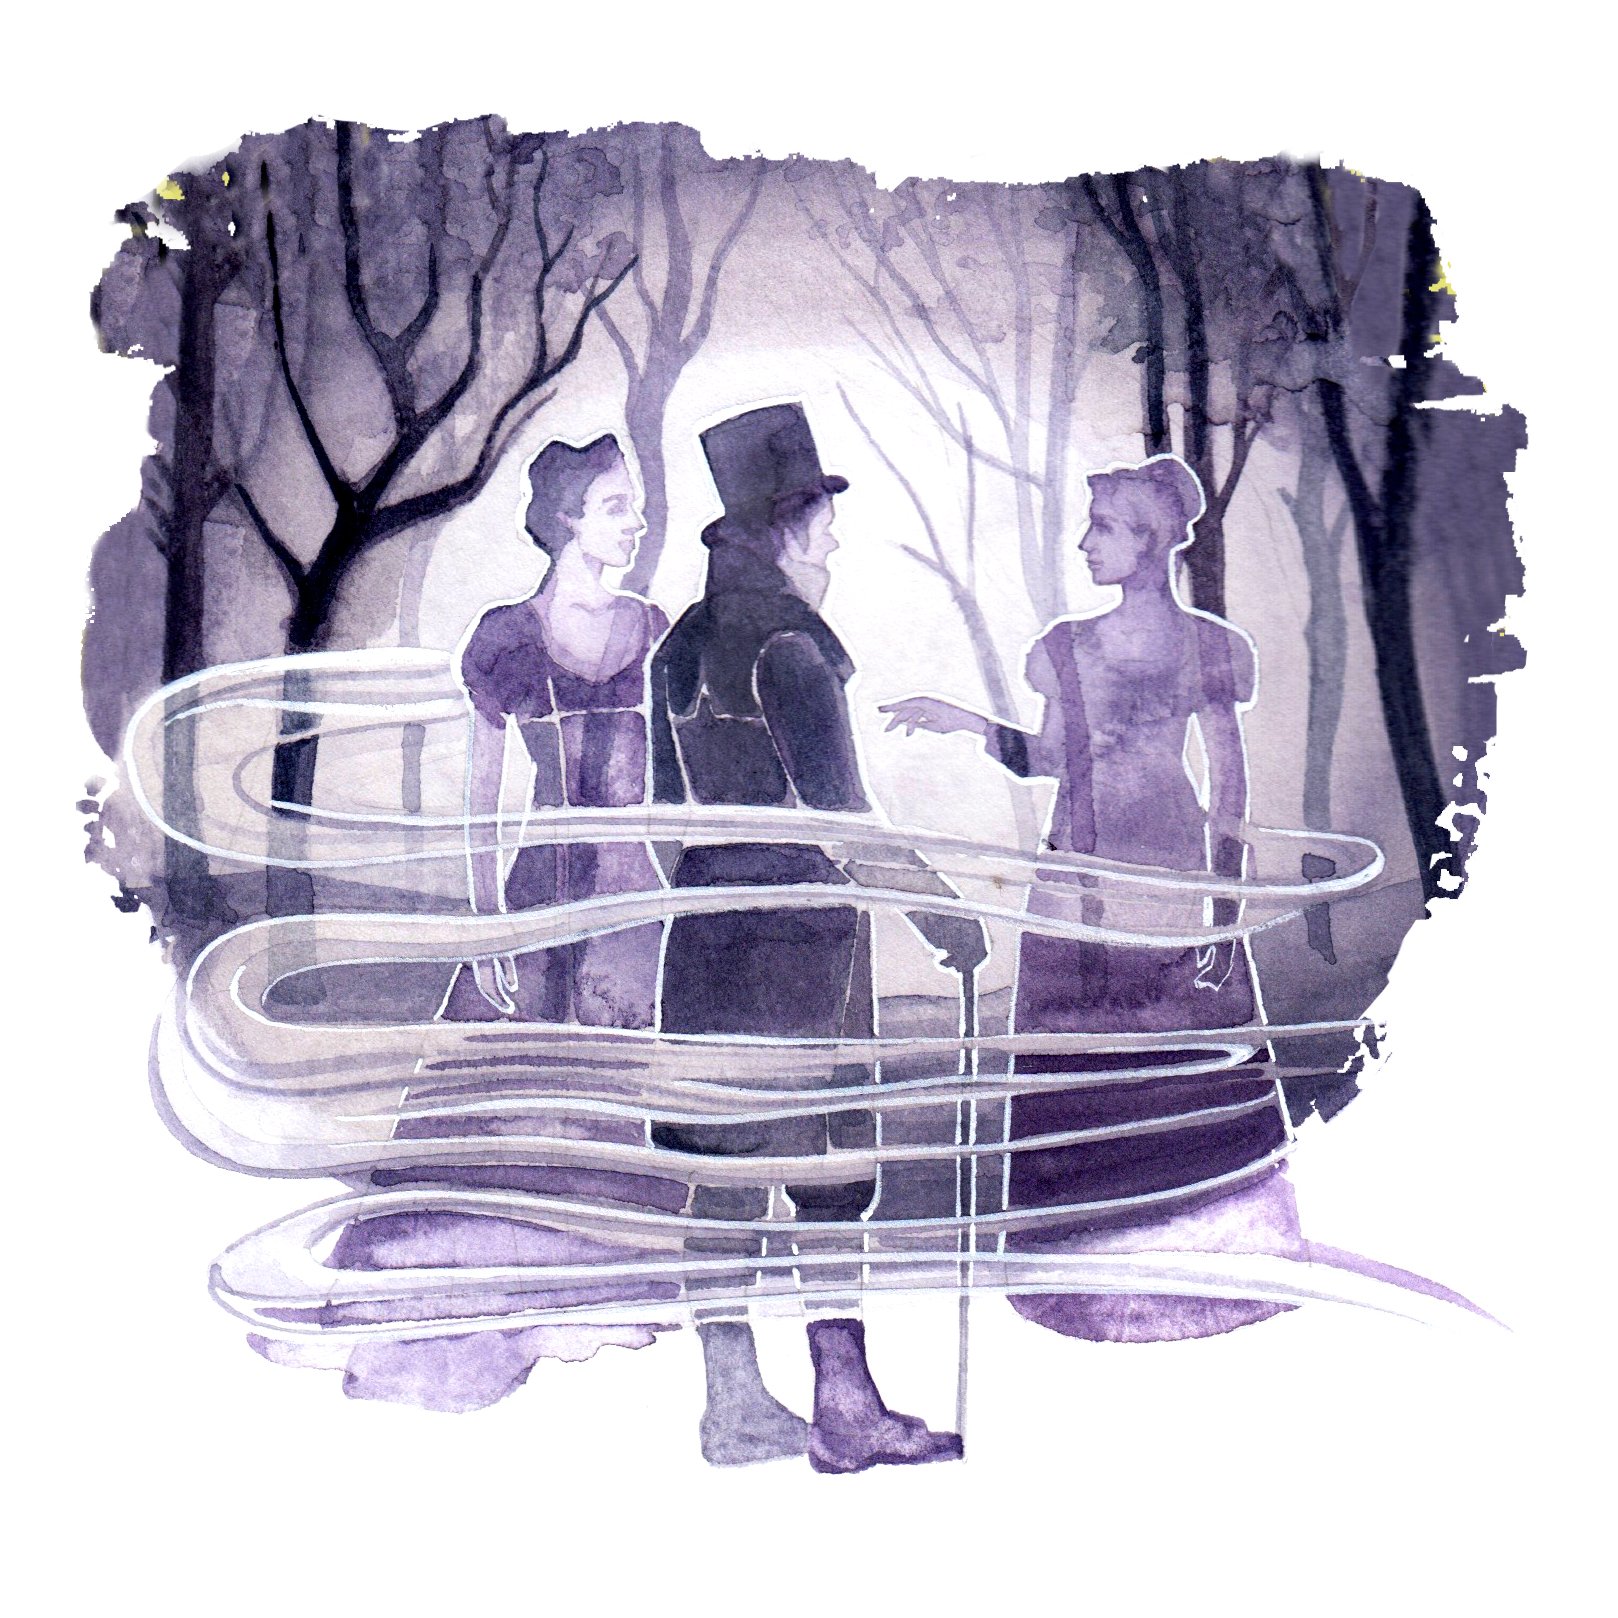 ghosts - spot illustration watercolour by Willa Gebbie